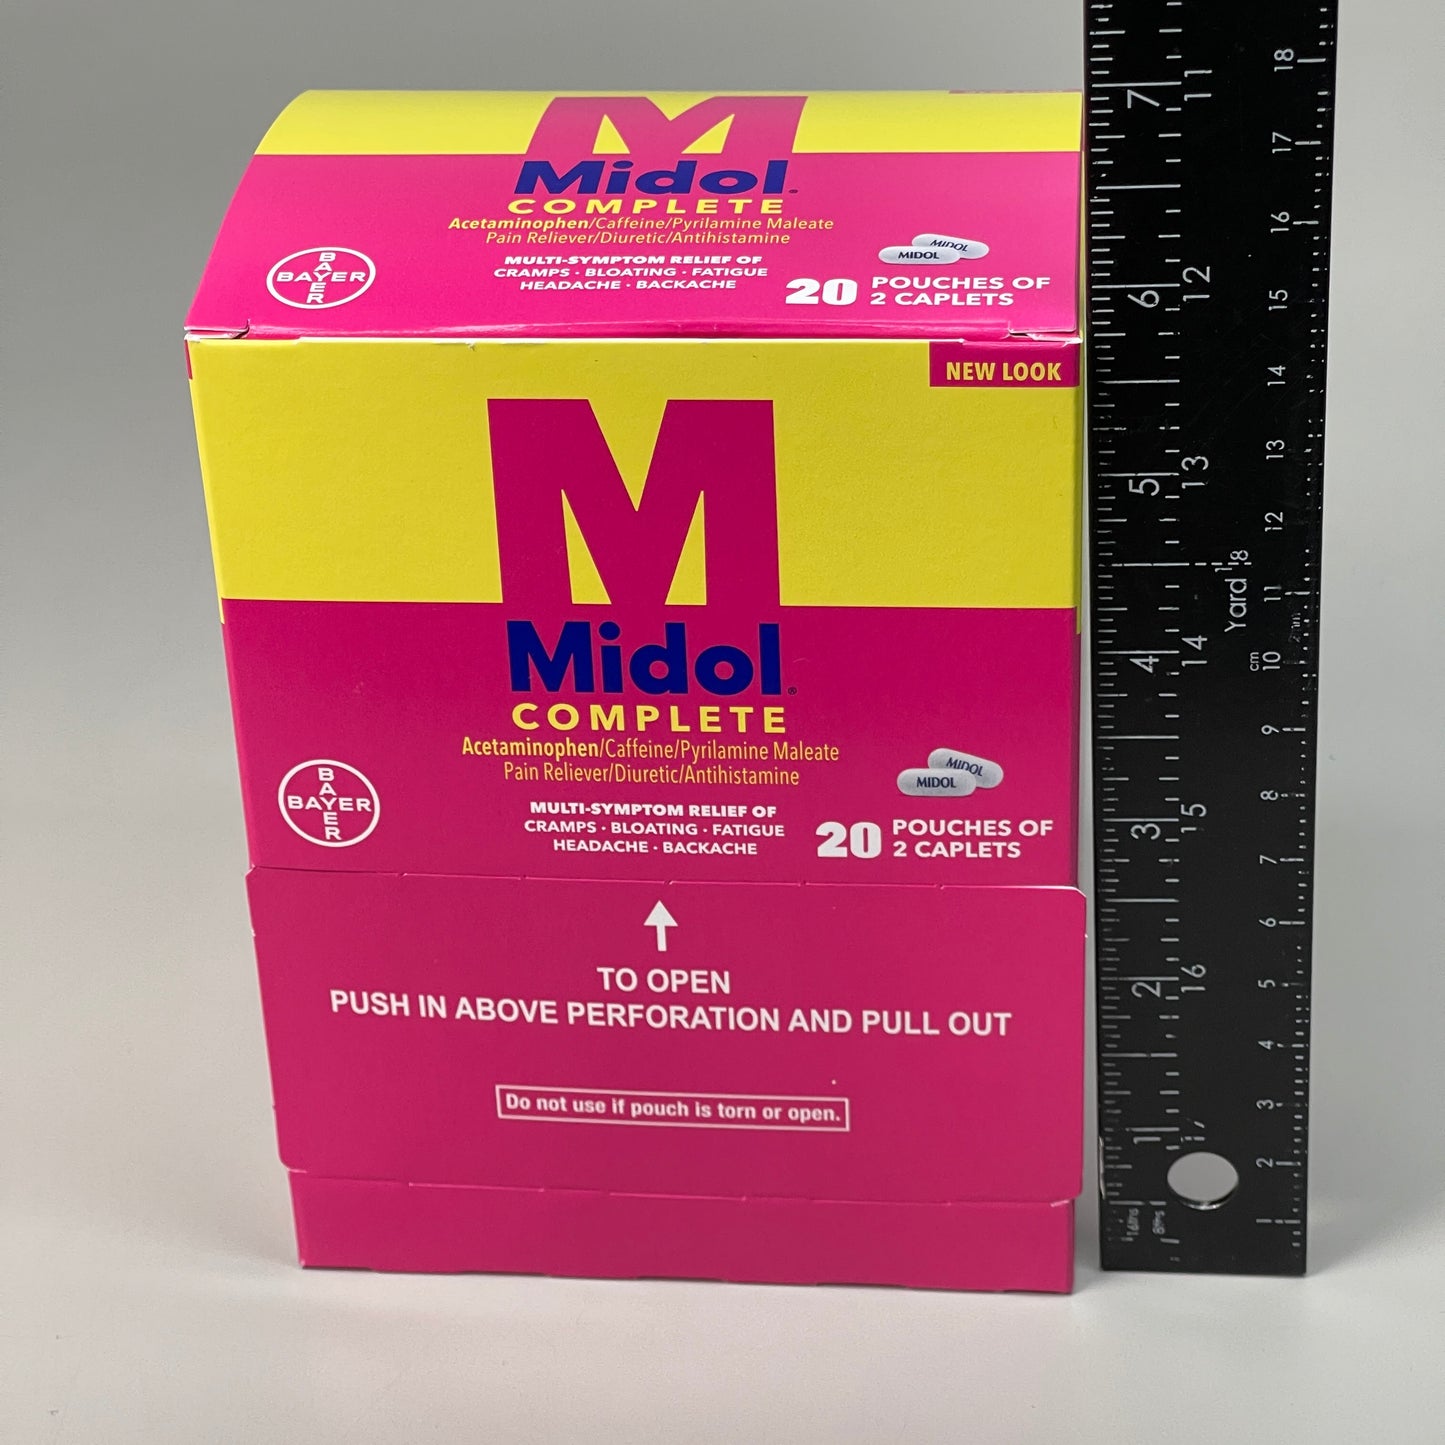 MIDOL Complete Symptom Relief of Cramps, Bloating, Fatigue 40 Caplets(20 pouches, 2 caplets each) Exp 08/24